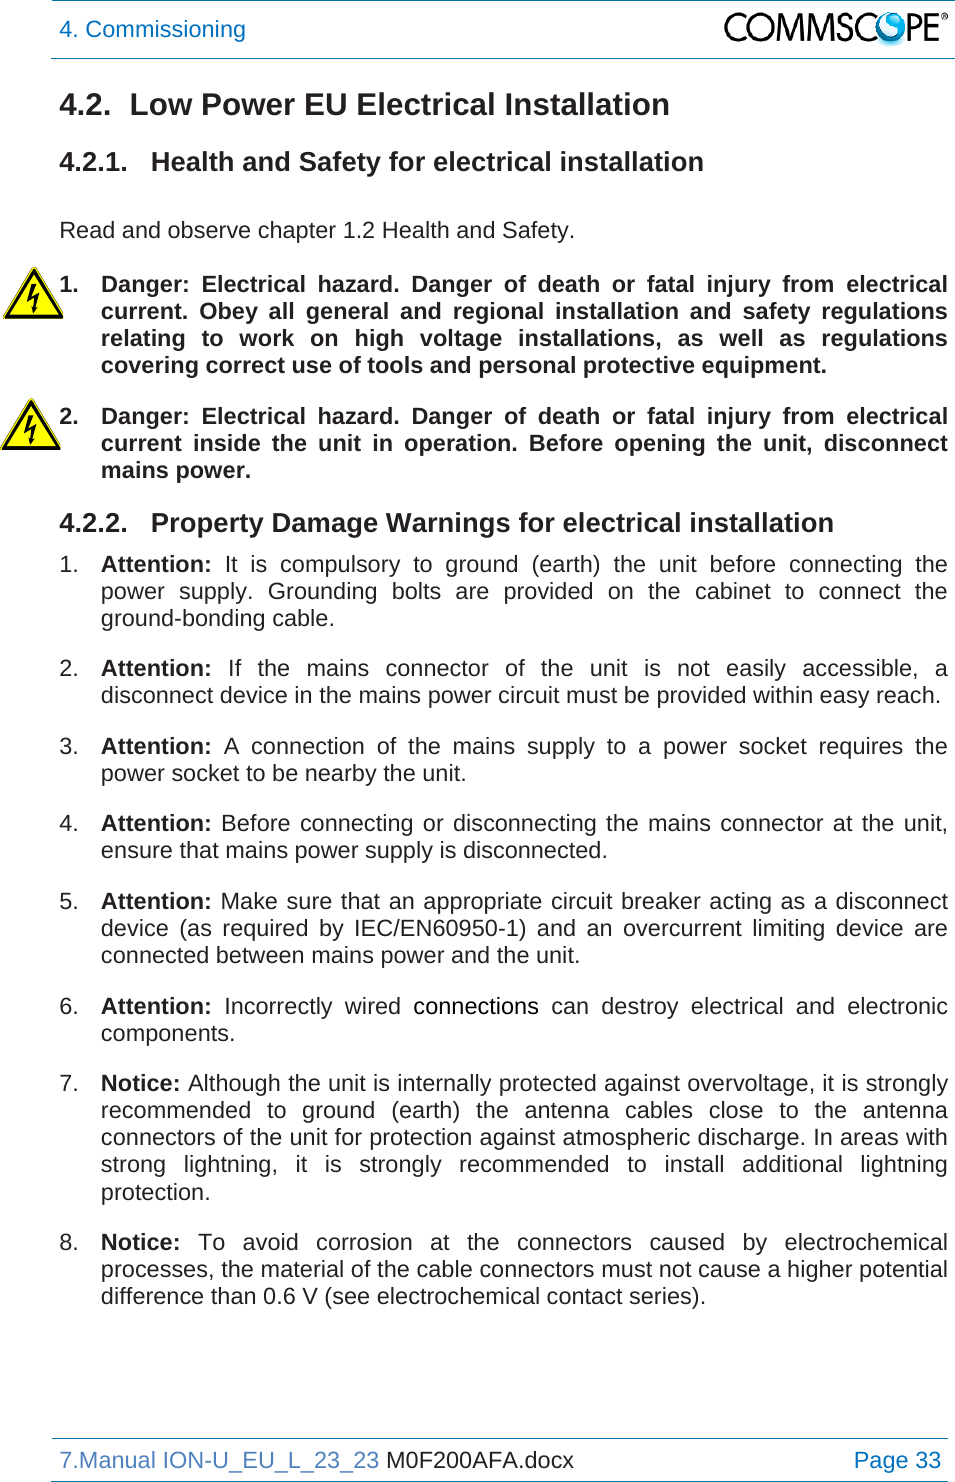 4. Commissioning  7.Manual ION-U_EU_L_23_23 M0F200AFA.docx Page 33 4.2.  Low Power EU Electrical Installation 4.2.1.  Health and Safety for electrical installation  Read and observe chapter 1.2 Health and Safety.  1.  Danger: Electrical hazard. Danger of death or fatal injury from electrical current. Obey all general and regional installation and safety regulations relating to work on high voltage installations, as well as regulations covering correct use of tools and personal protective equipment. 2.  Danger: Electrical hazard. Danger of death or fatal injury from electrical current inside the unit in operation. Before opening the unit, disconnect mains power. 4.2.2.  Property Damage Warnings for electrical installation 1.  Attention: It is compulsory to ground (earth) the unit before connecting the power supply. Grounding bolts are provided on the cabinet to connect the ground-bonding cable. 2.  Attention:  If the mains connector of the unit is not easily accessible, a disconnect device in the mains power circuit must be provided within easy reach. 3.  Attention: A connection of the mains supply to a power socket requires the power socket to be nearby the unit. 4.  Attention: Before connecting or disconnecting the mains connector at the unit, ensure that mains power supply is disconnected. 5.  Attention: Make sure that an appropriate circuit breaker acting as a disconnect device (as required by IEC/EN60950-1) and an overcurrent limiting device are connected between mains power and the unit. 6.  Attention: Incorrectly wired connections can destroy electrical and electronic components.  7.  Notice: Although the unit is internally protected against overvoltage, it is strongly recommended to ground (earth) the antenna cables close to the antenna connectors of the unit for protection against atmospheric discharge. In areas with strong lightning, it is strongly recommended to install additional lightning protection. 8.  Notice: To avoid corrosion at the connectors caused by electrochemical processes, the material of the cable connectors must not cause a higher potential difference than 0.6 V (see electrochemical contact series).   